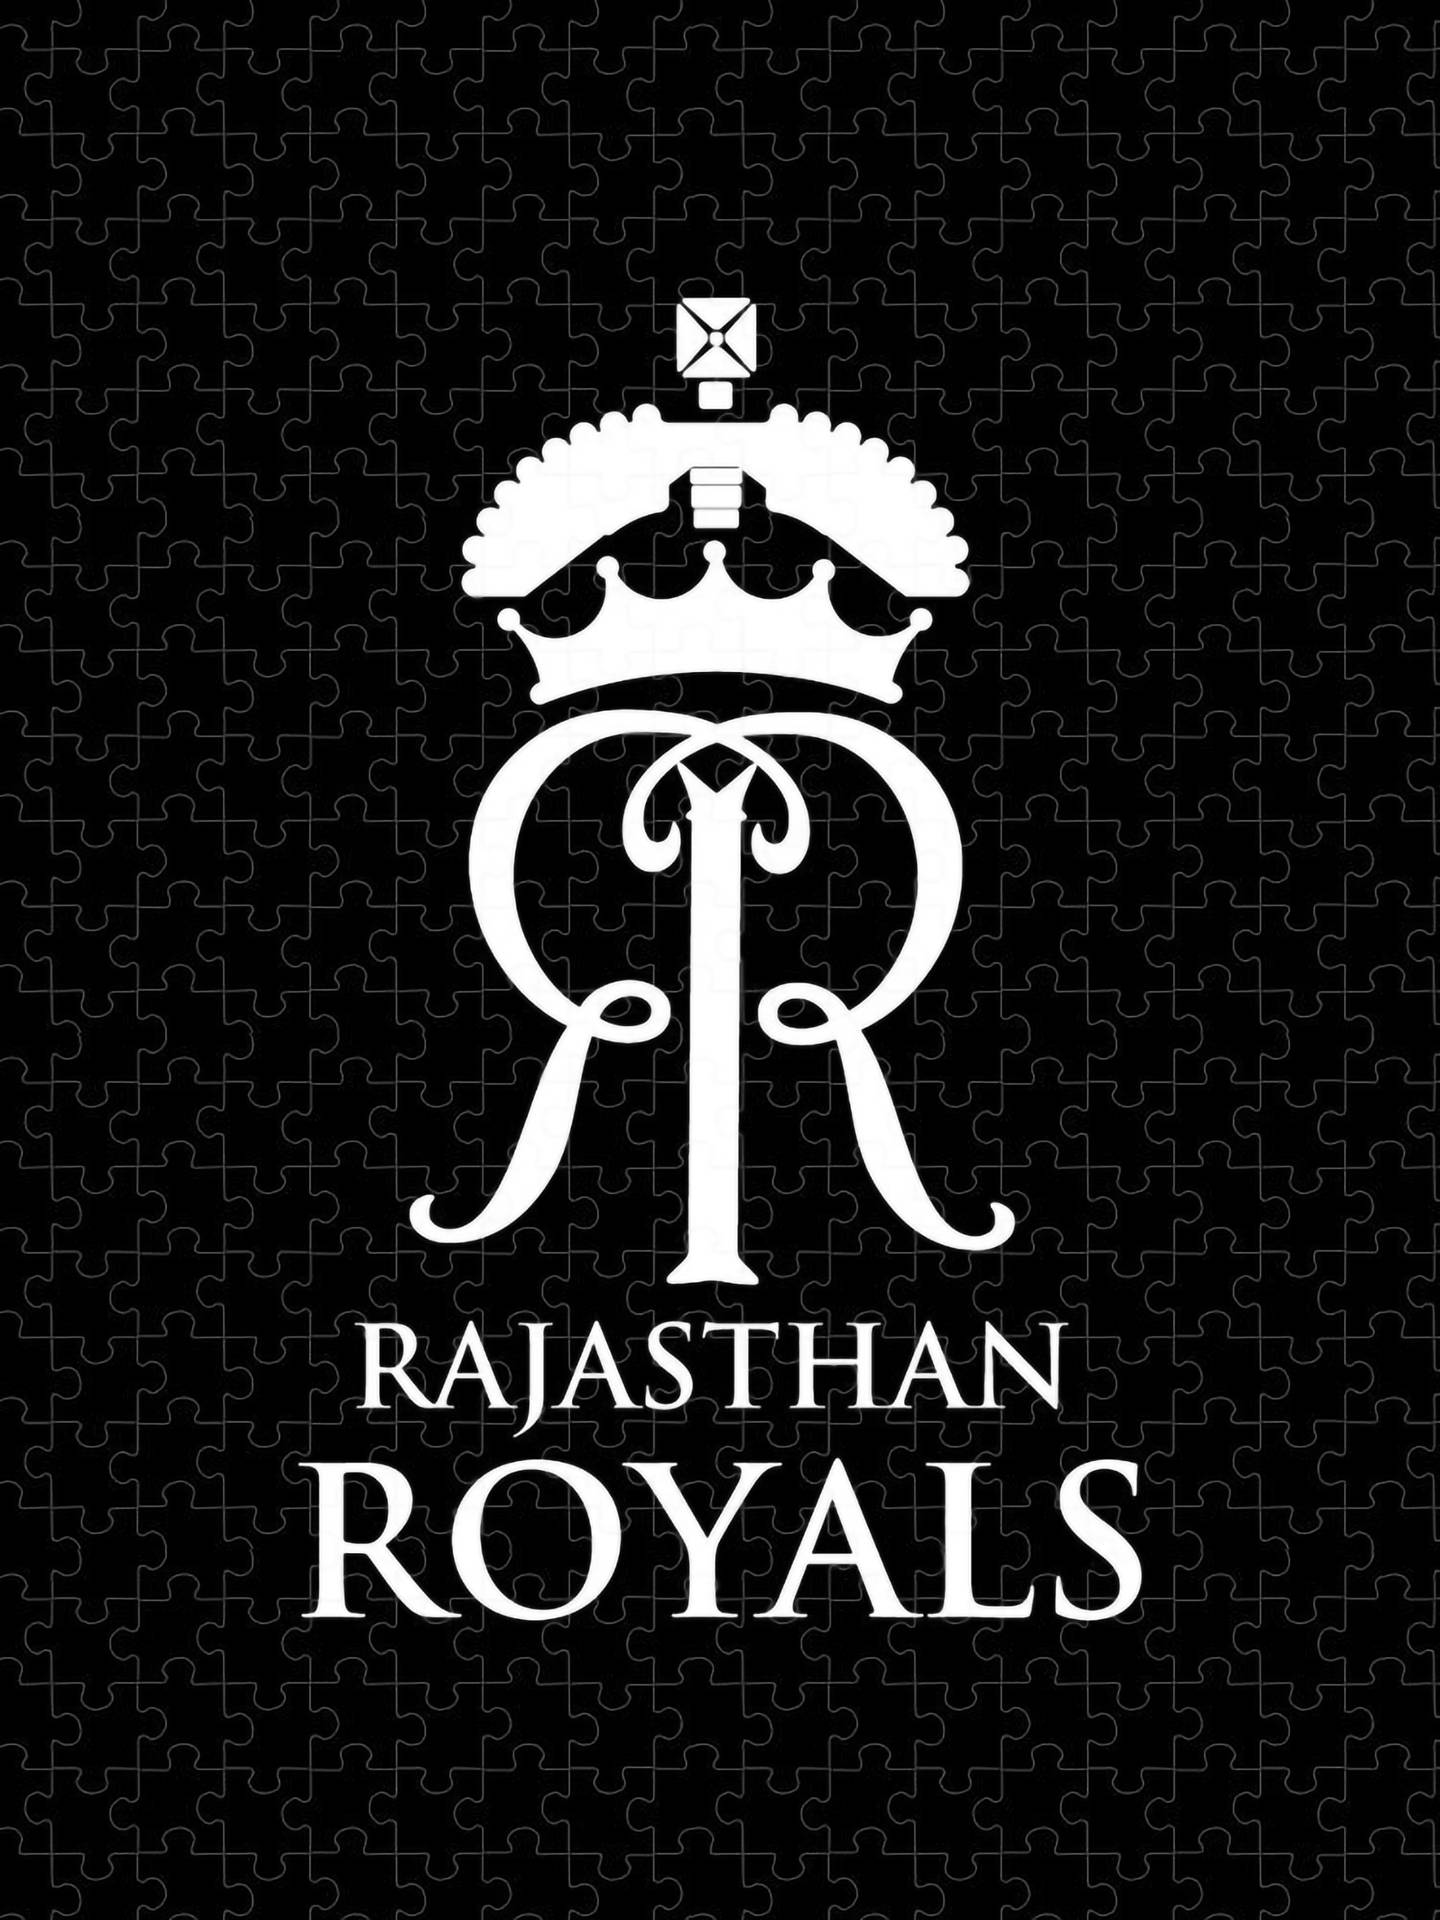 Rajasthan Royals Puzzle Background Wallpaper